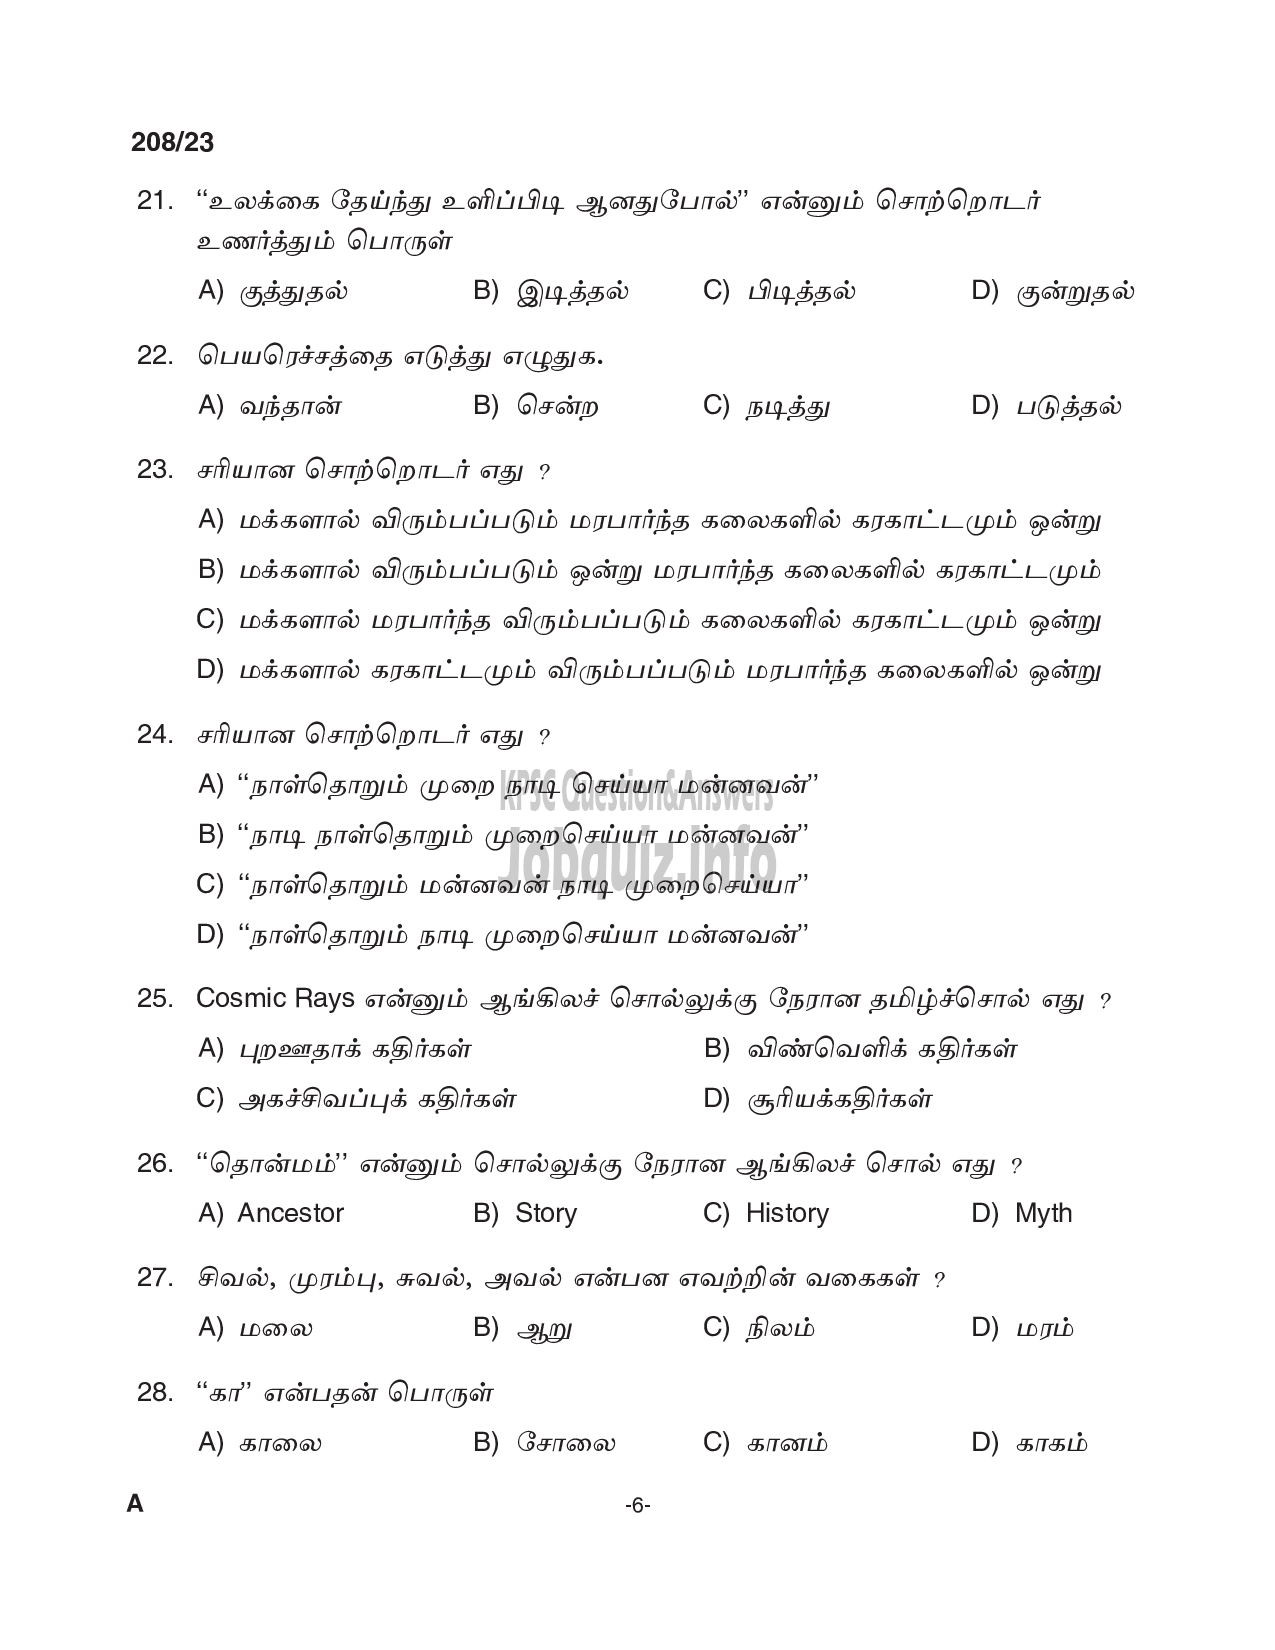 Kerala PSC Question Paper - Clerk/ LD Clerk (Tamil and Malayalam knowing) (Preliminary Examination)-6